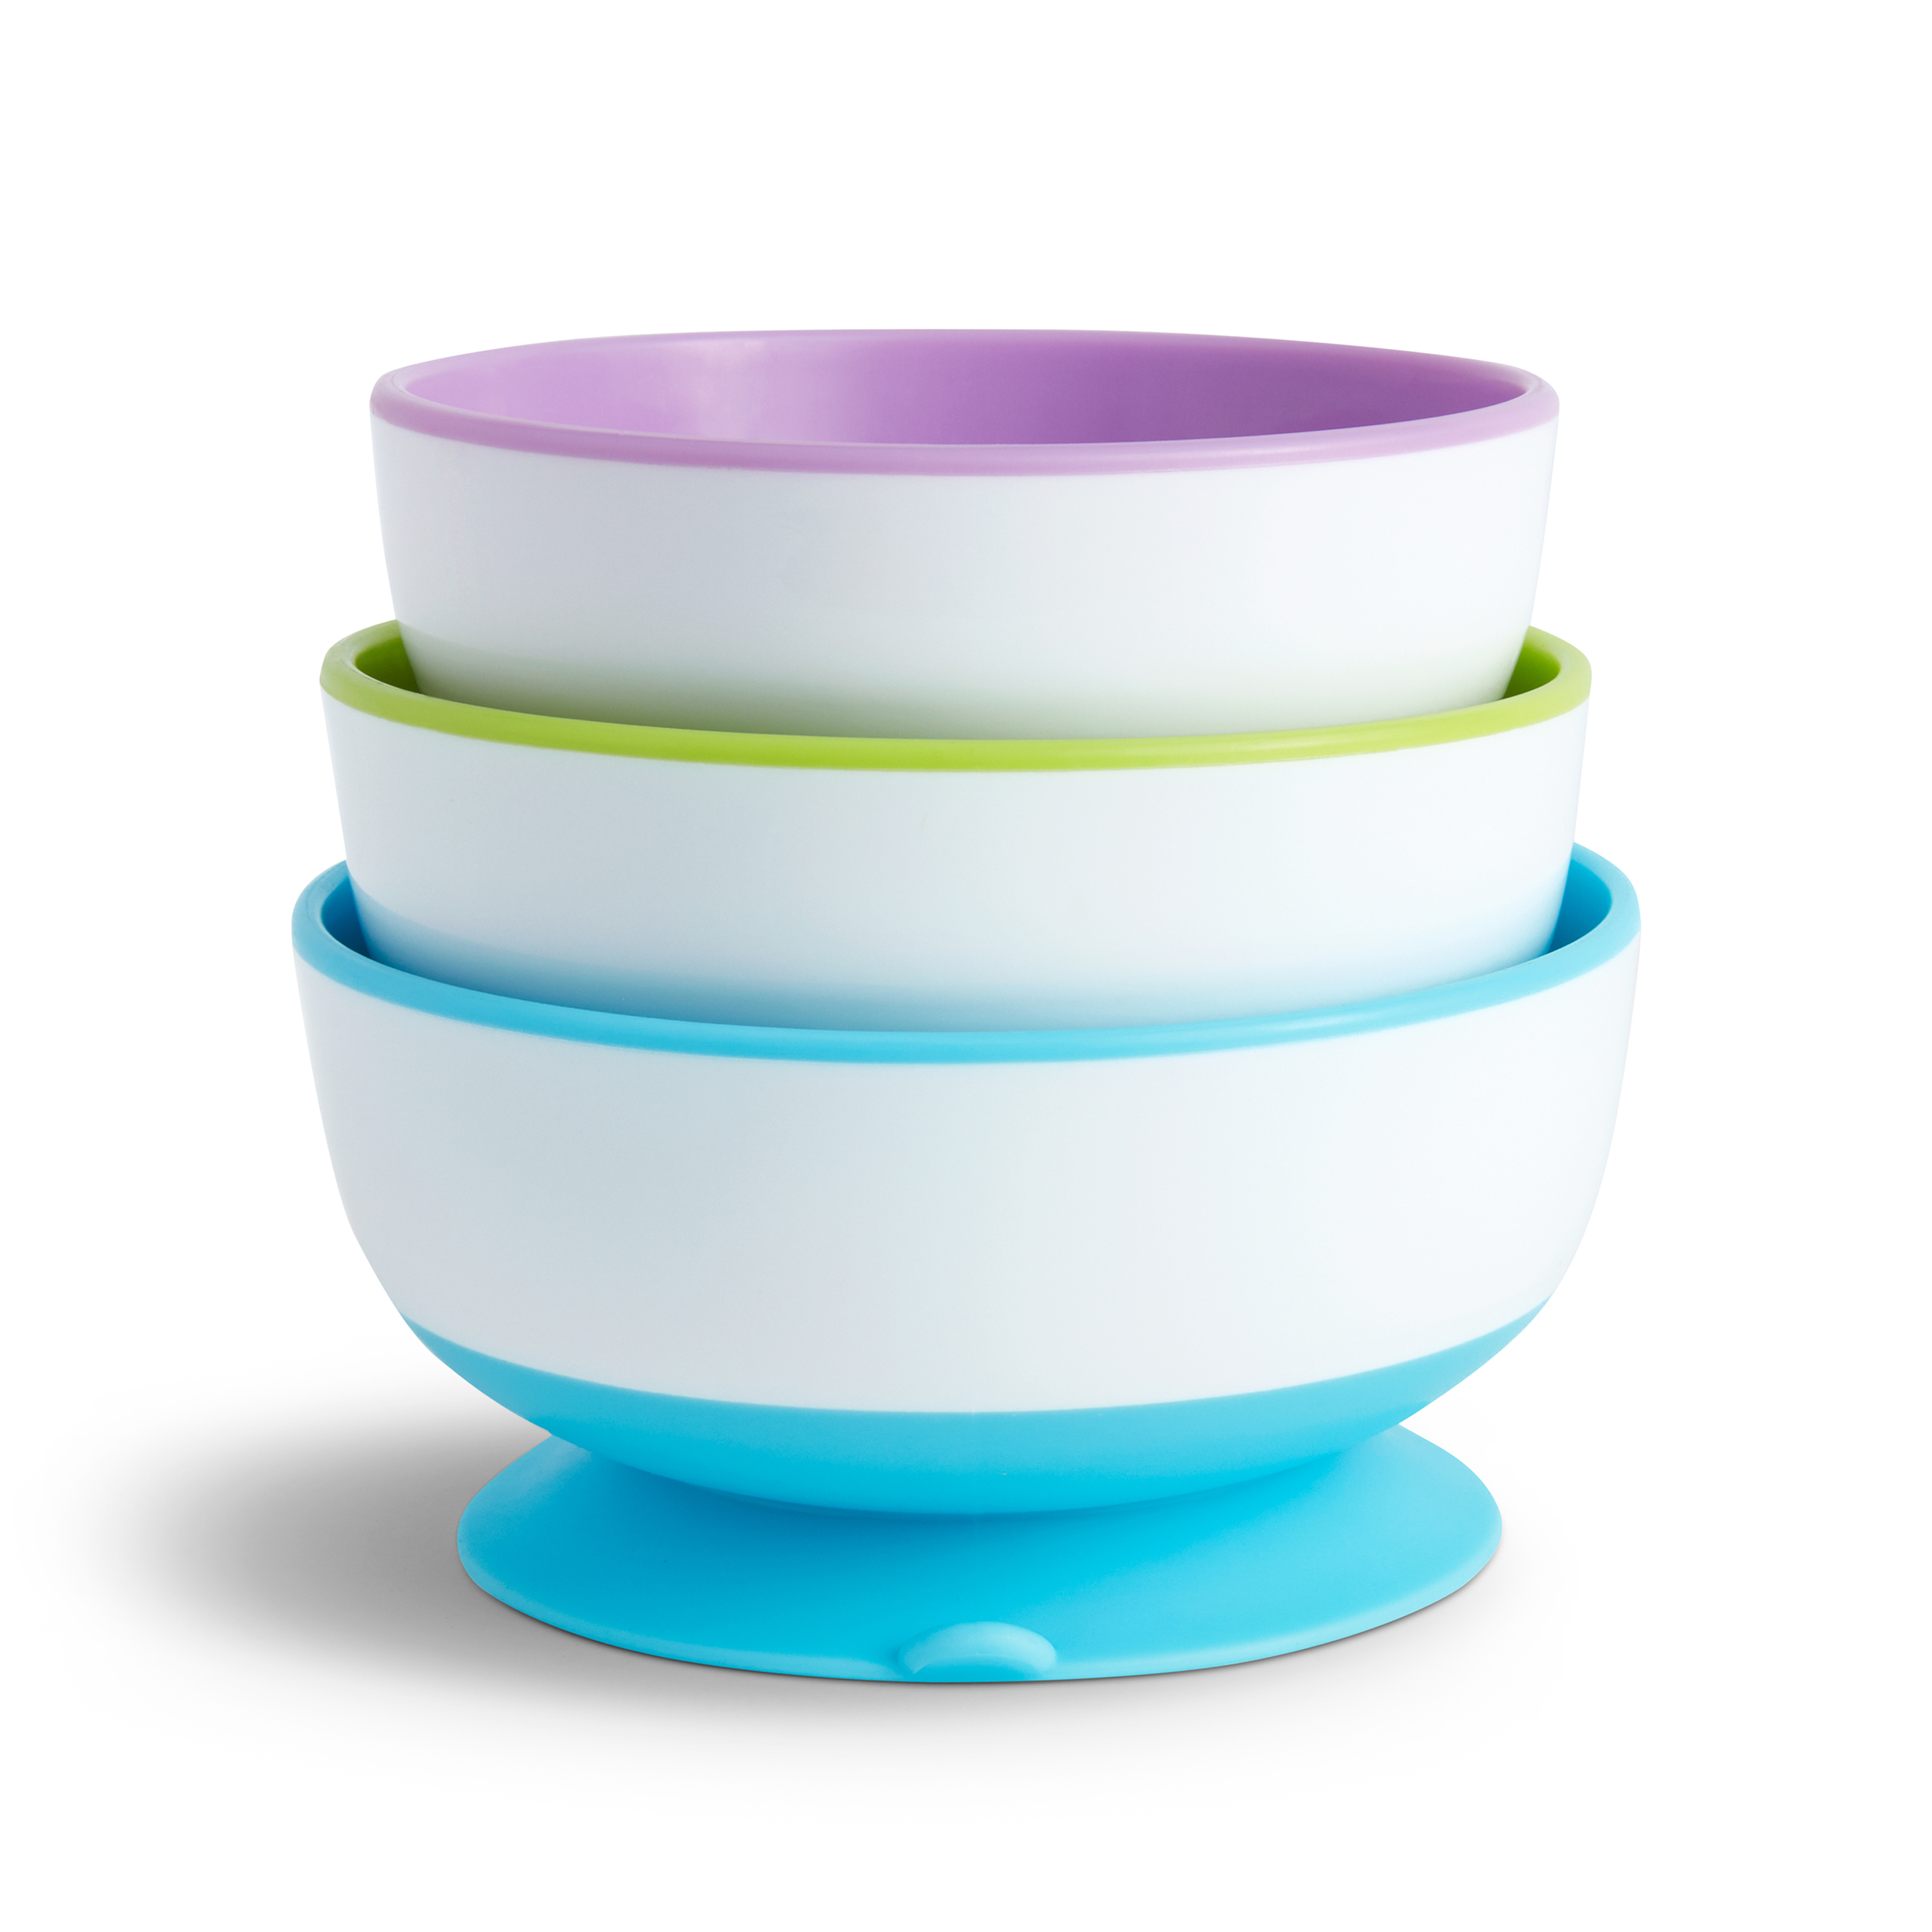 Munchkin® Stay Put Suction Round Bowls, Plastic, Multi-Color, 3 Pack - image 5 of 9